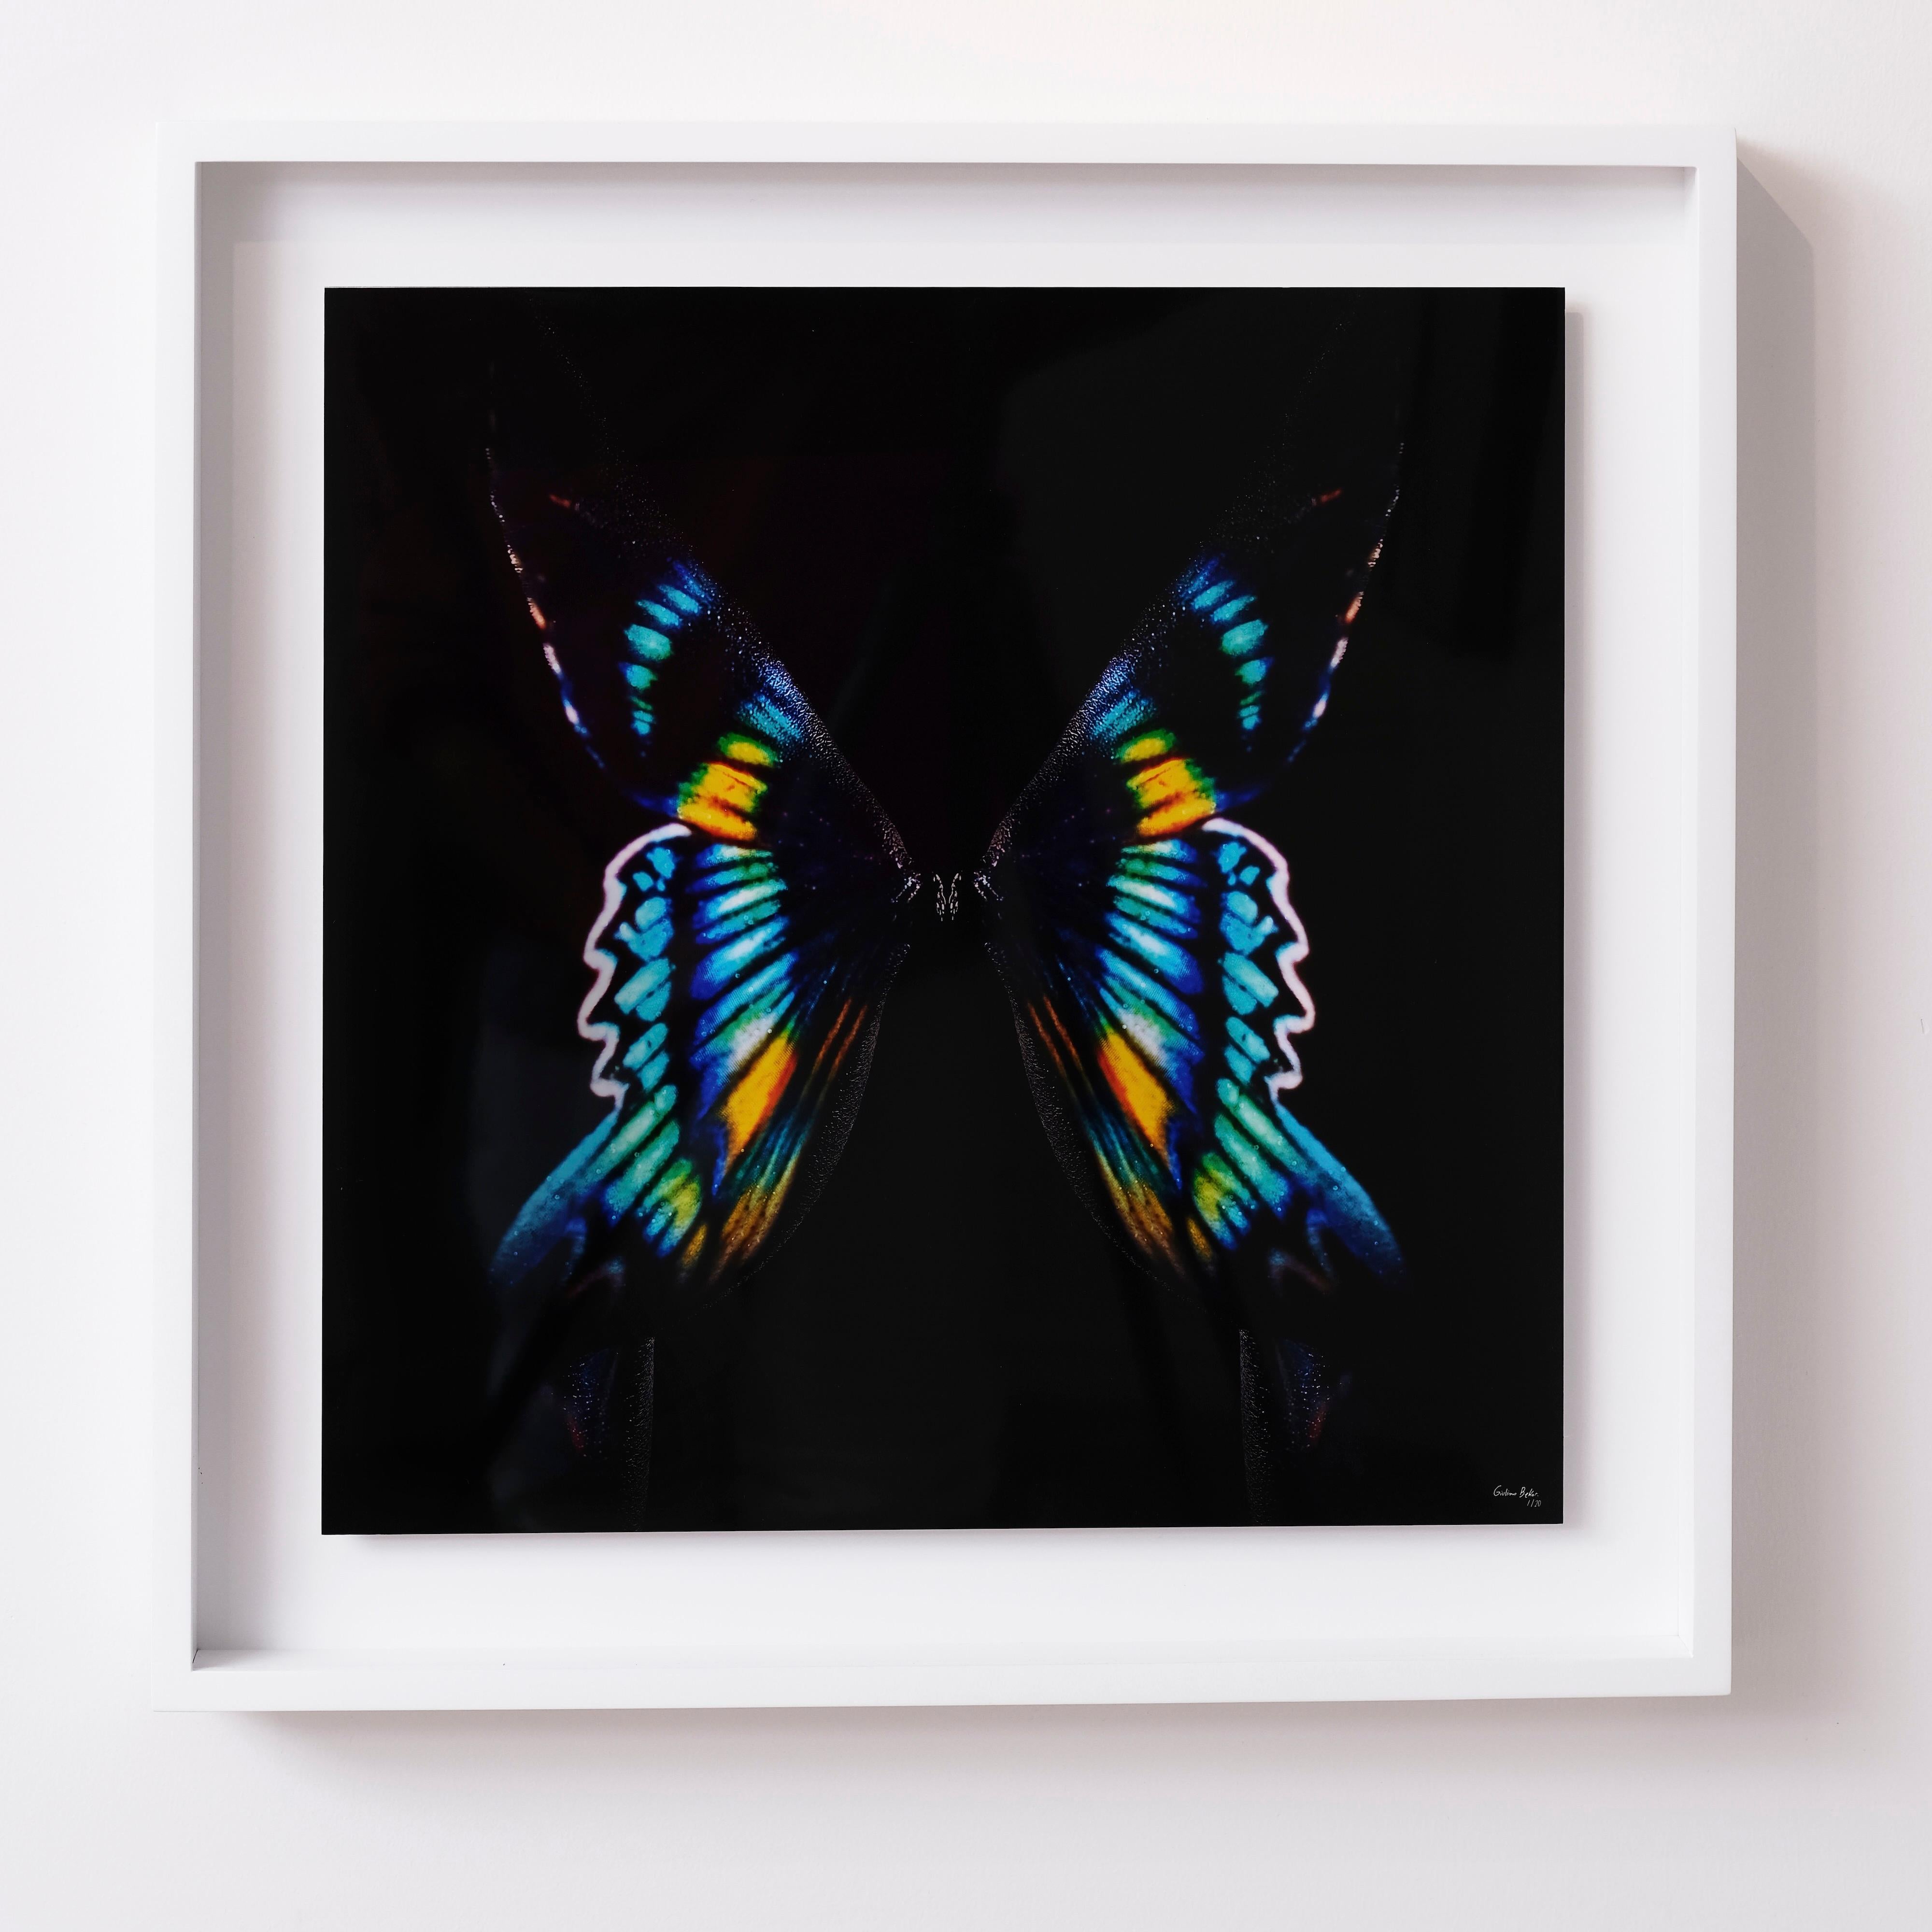 "Butterfly 8" (FRAMED) Photography 16" x 16" in Edition 1/20 by Giuliano Bekor